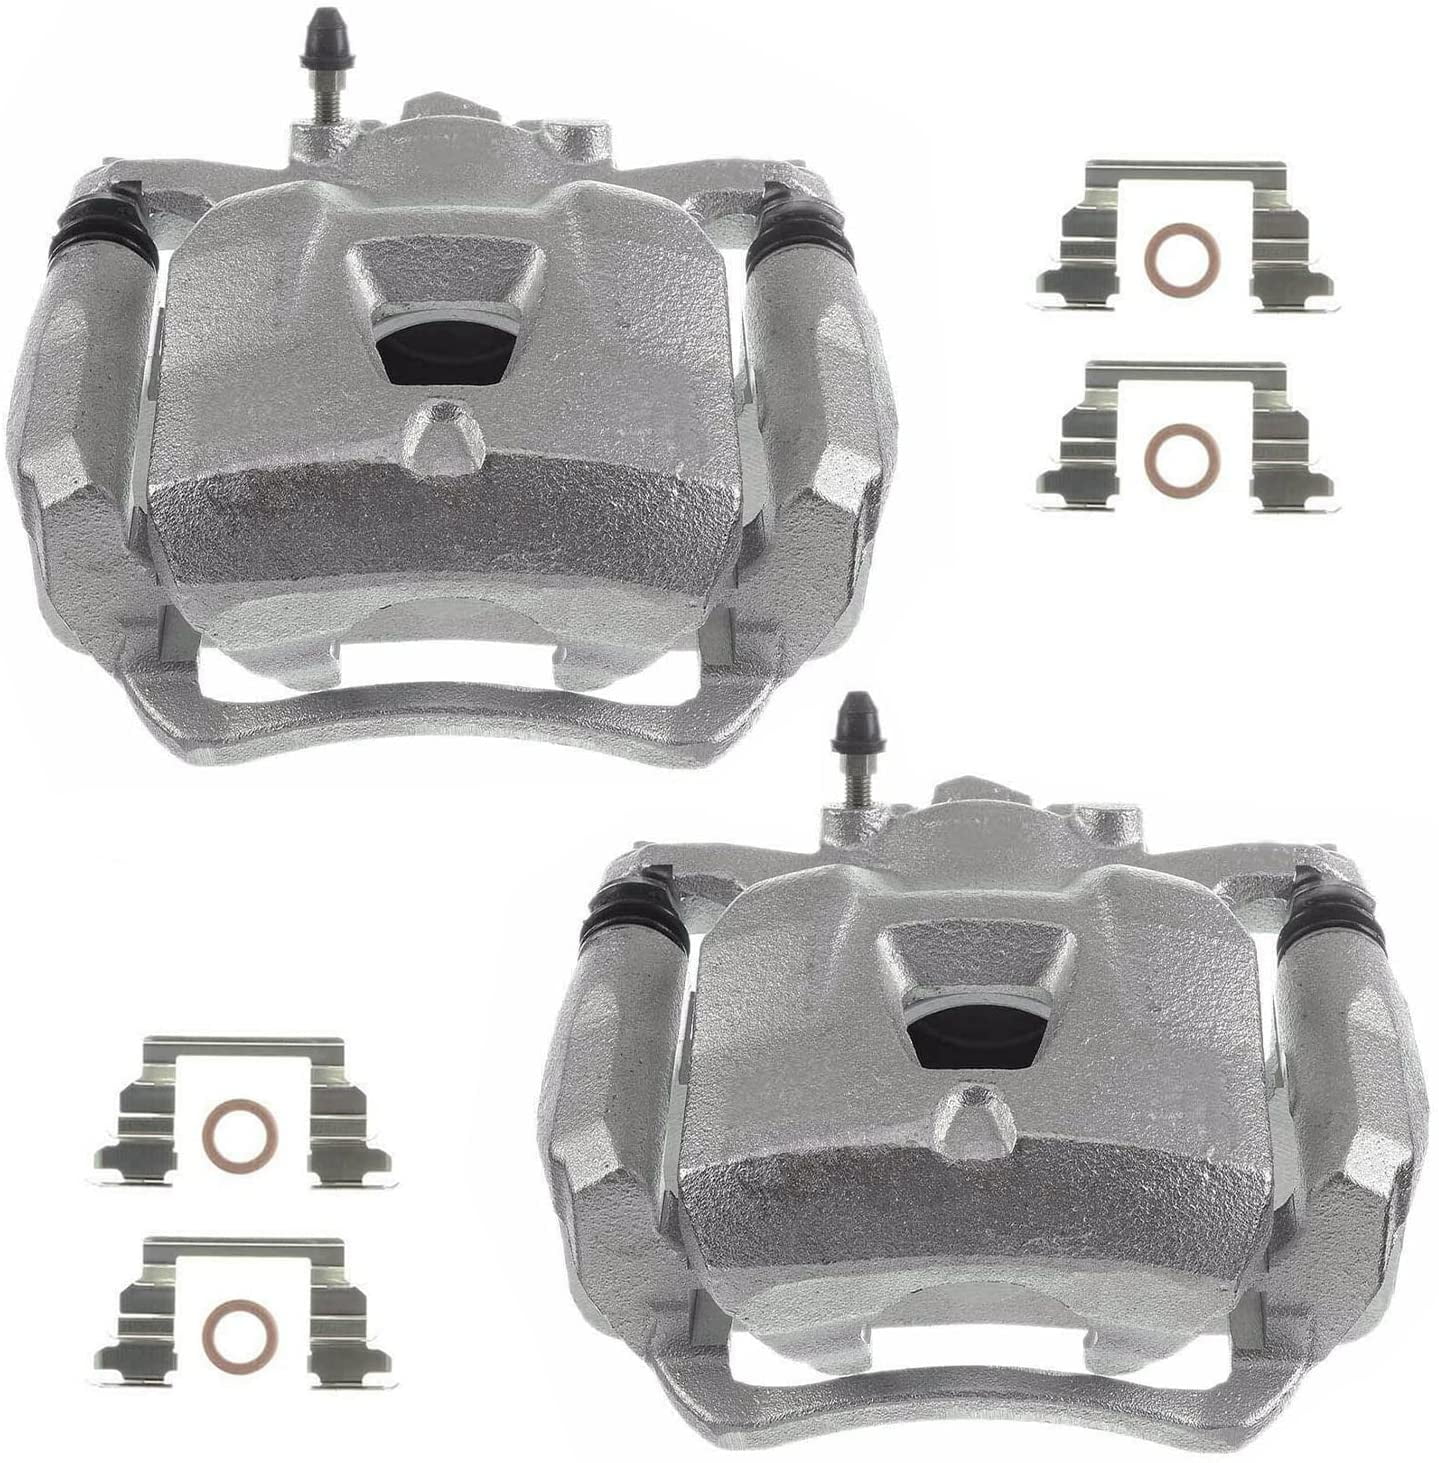 For INFINITI I35 NISSAN ALTIMA MAXIMA Front OE Brake Calipers and Rotors Pads